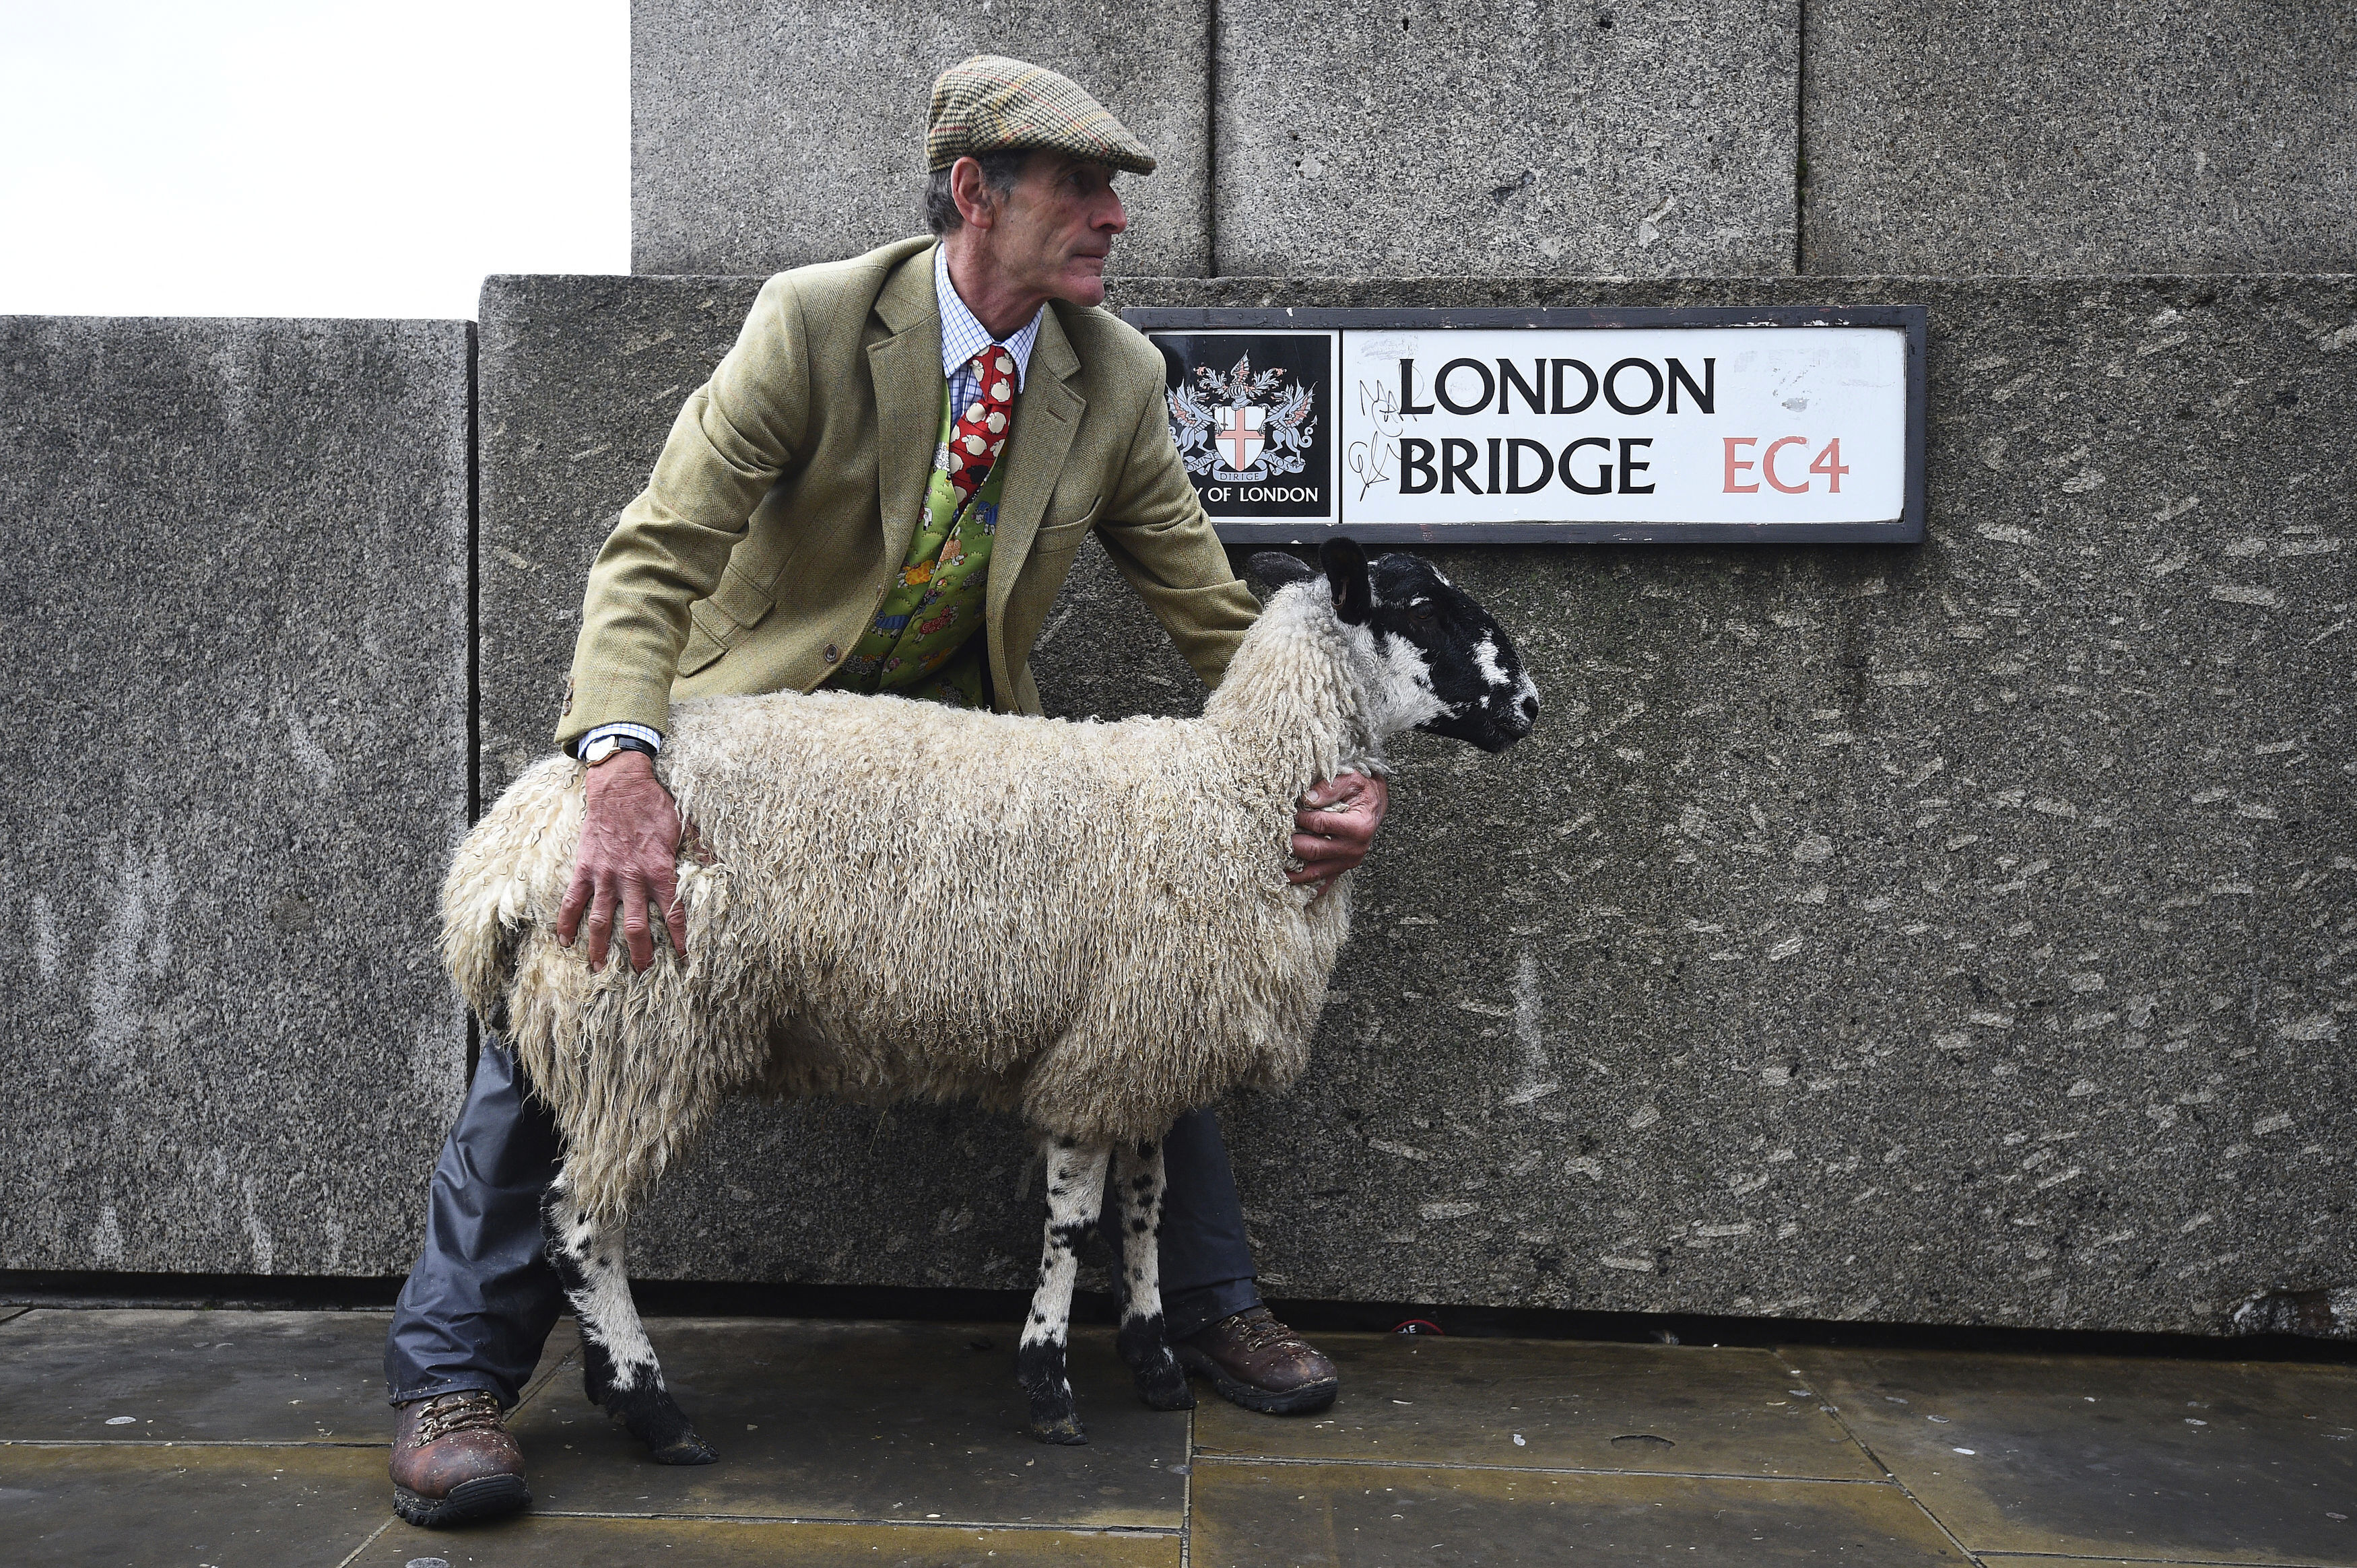 A sheep on London Bridge before being driven across by 600 Freemen of the City of London, London, Sunday, Sept. 29, 2019. The drive is a British tradition dating back hundreds of years and will see more than 600 Freemen of the City of London take up their historic entitlement to drive their sheep over what was once London's only river crossing. (Kirsty O'Connor/PA via AP)